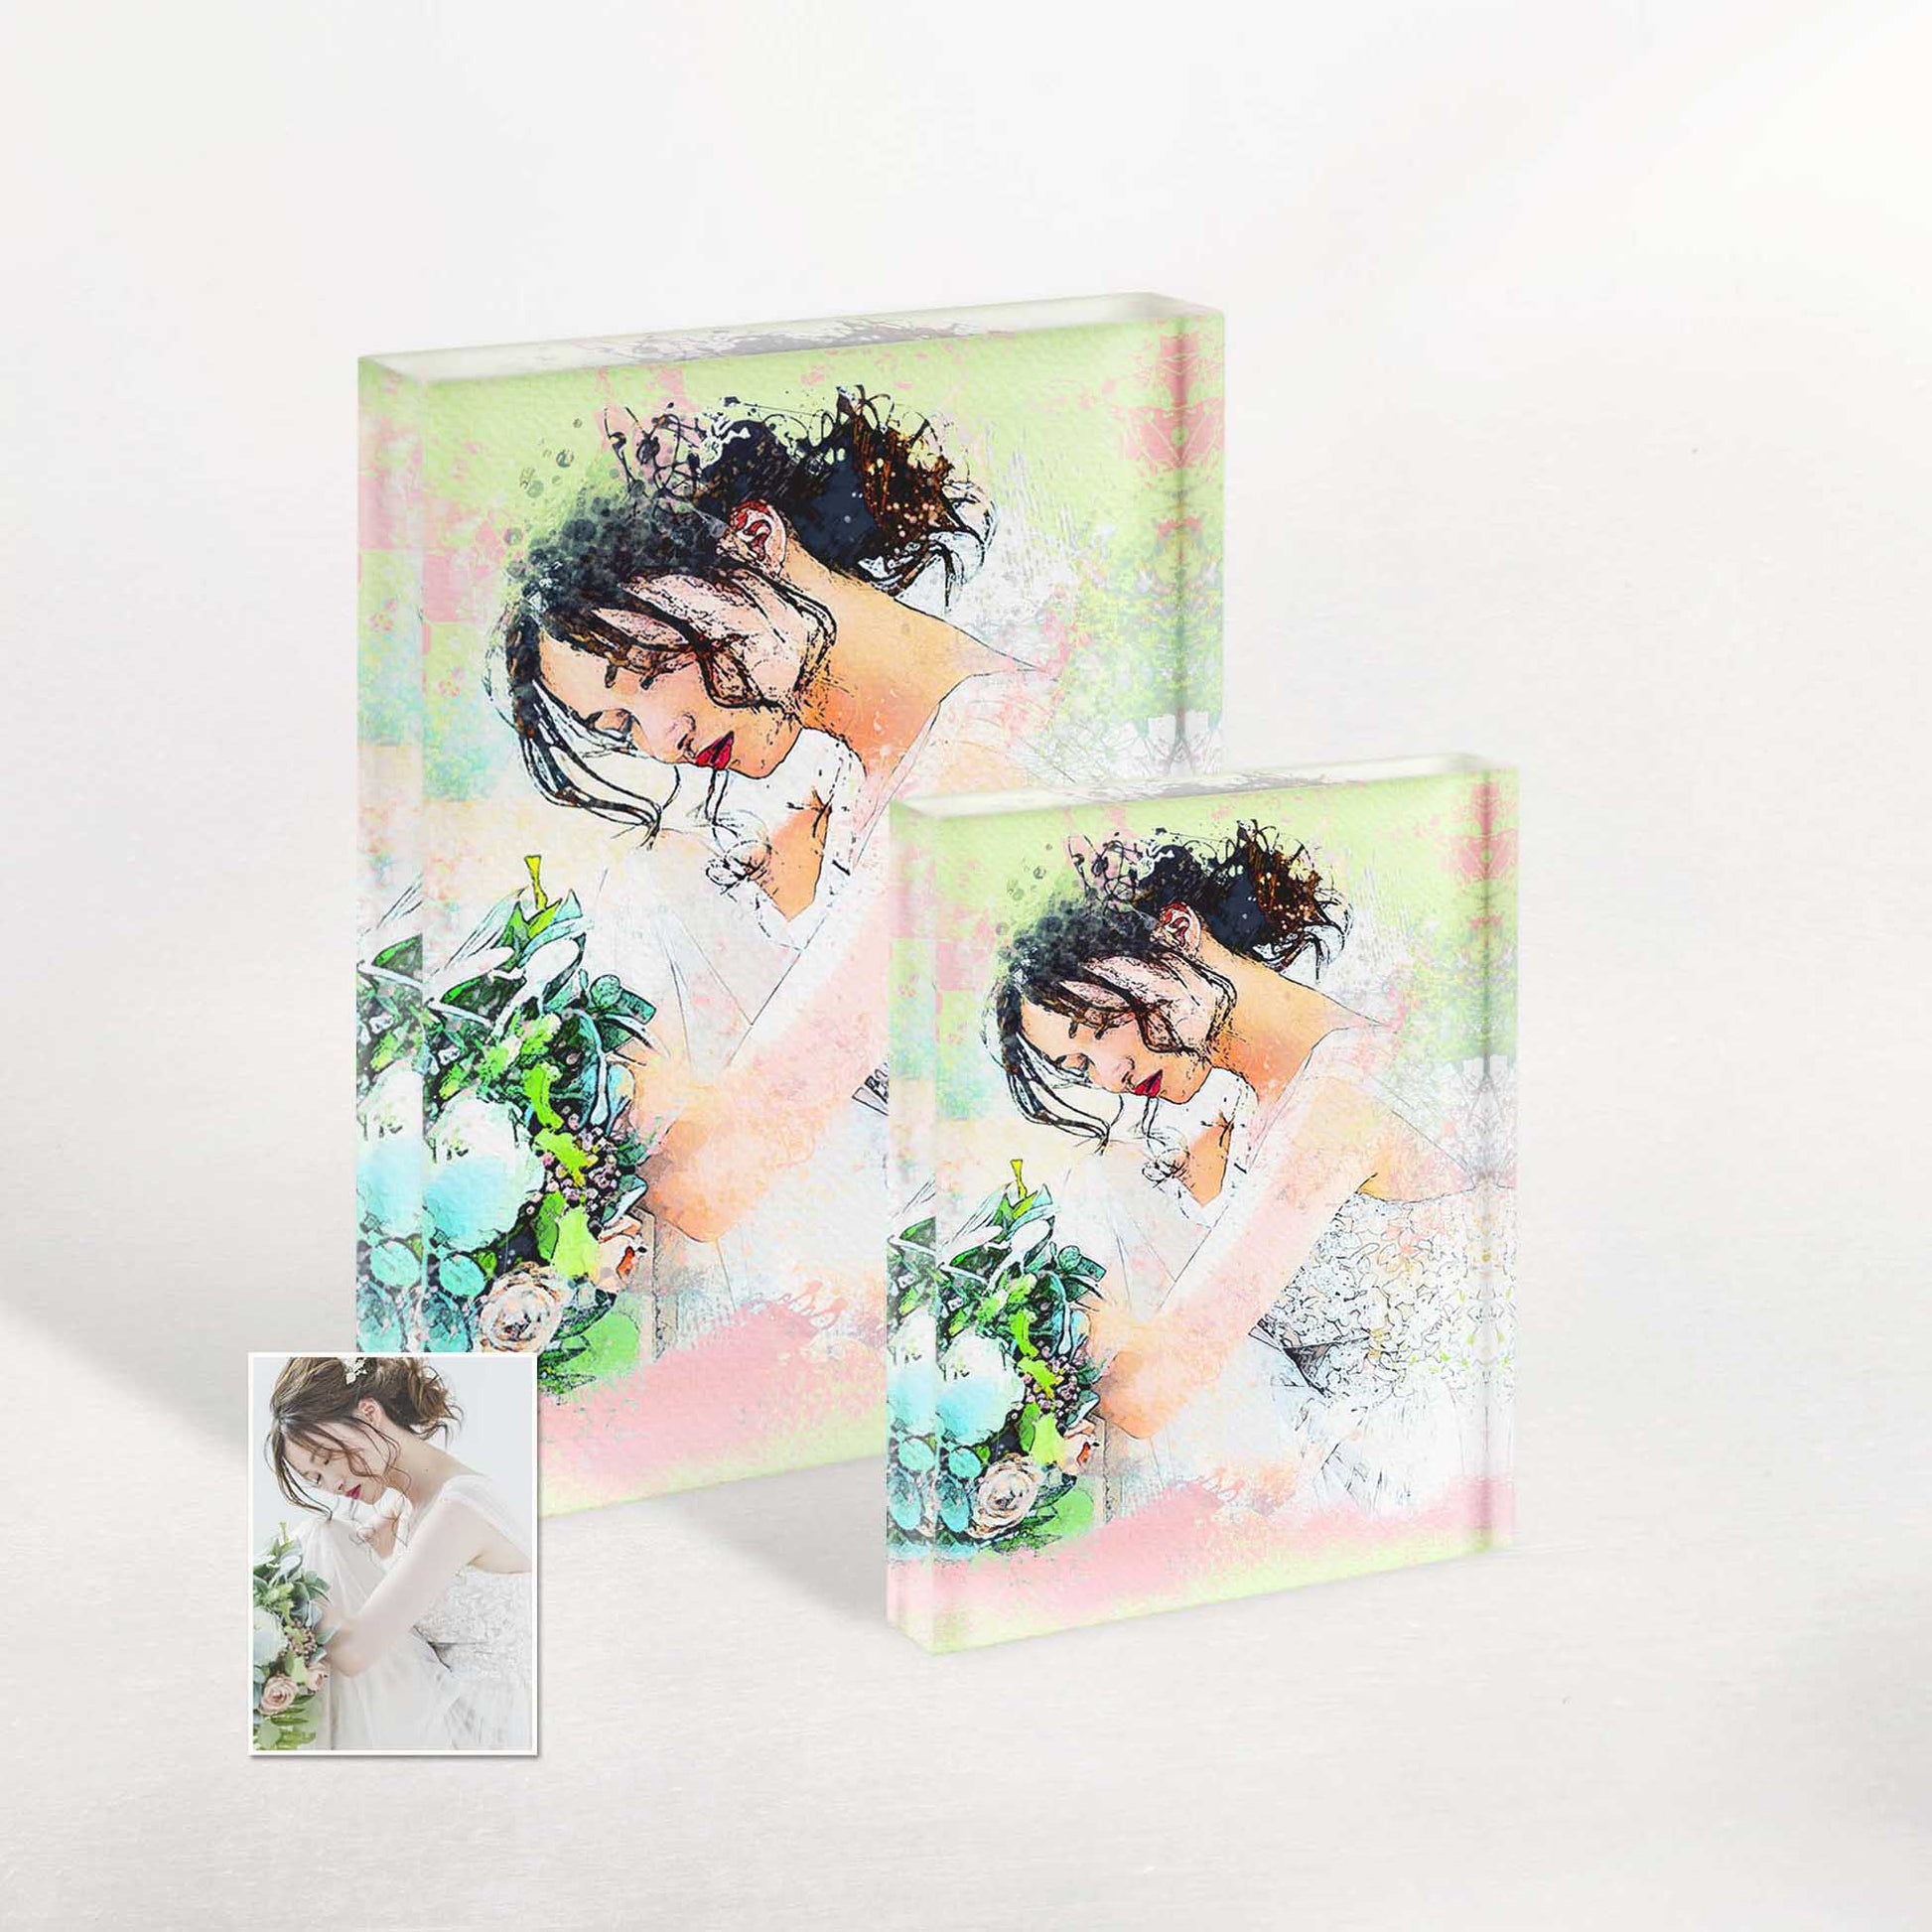 Transform your favorite memories into cool and creative artwork with our Personalised Splash Watercolor Acrylic Block Photo. The splashes of color evoke inspiration and emotion, making it a unique